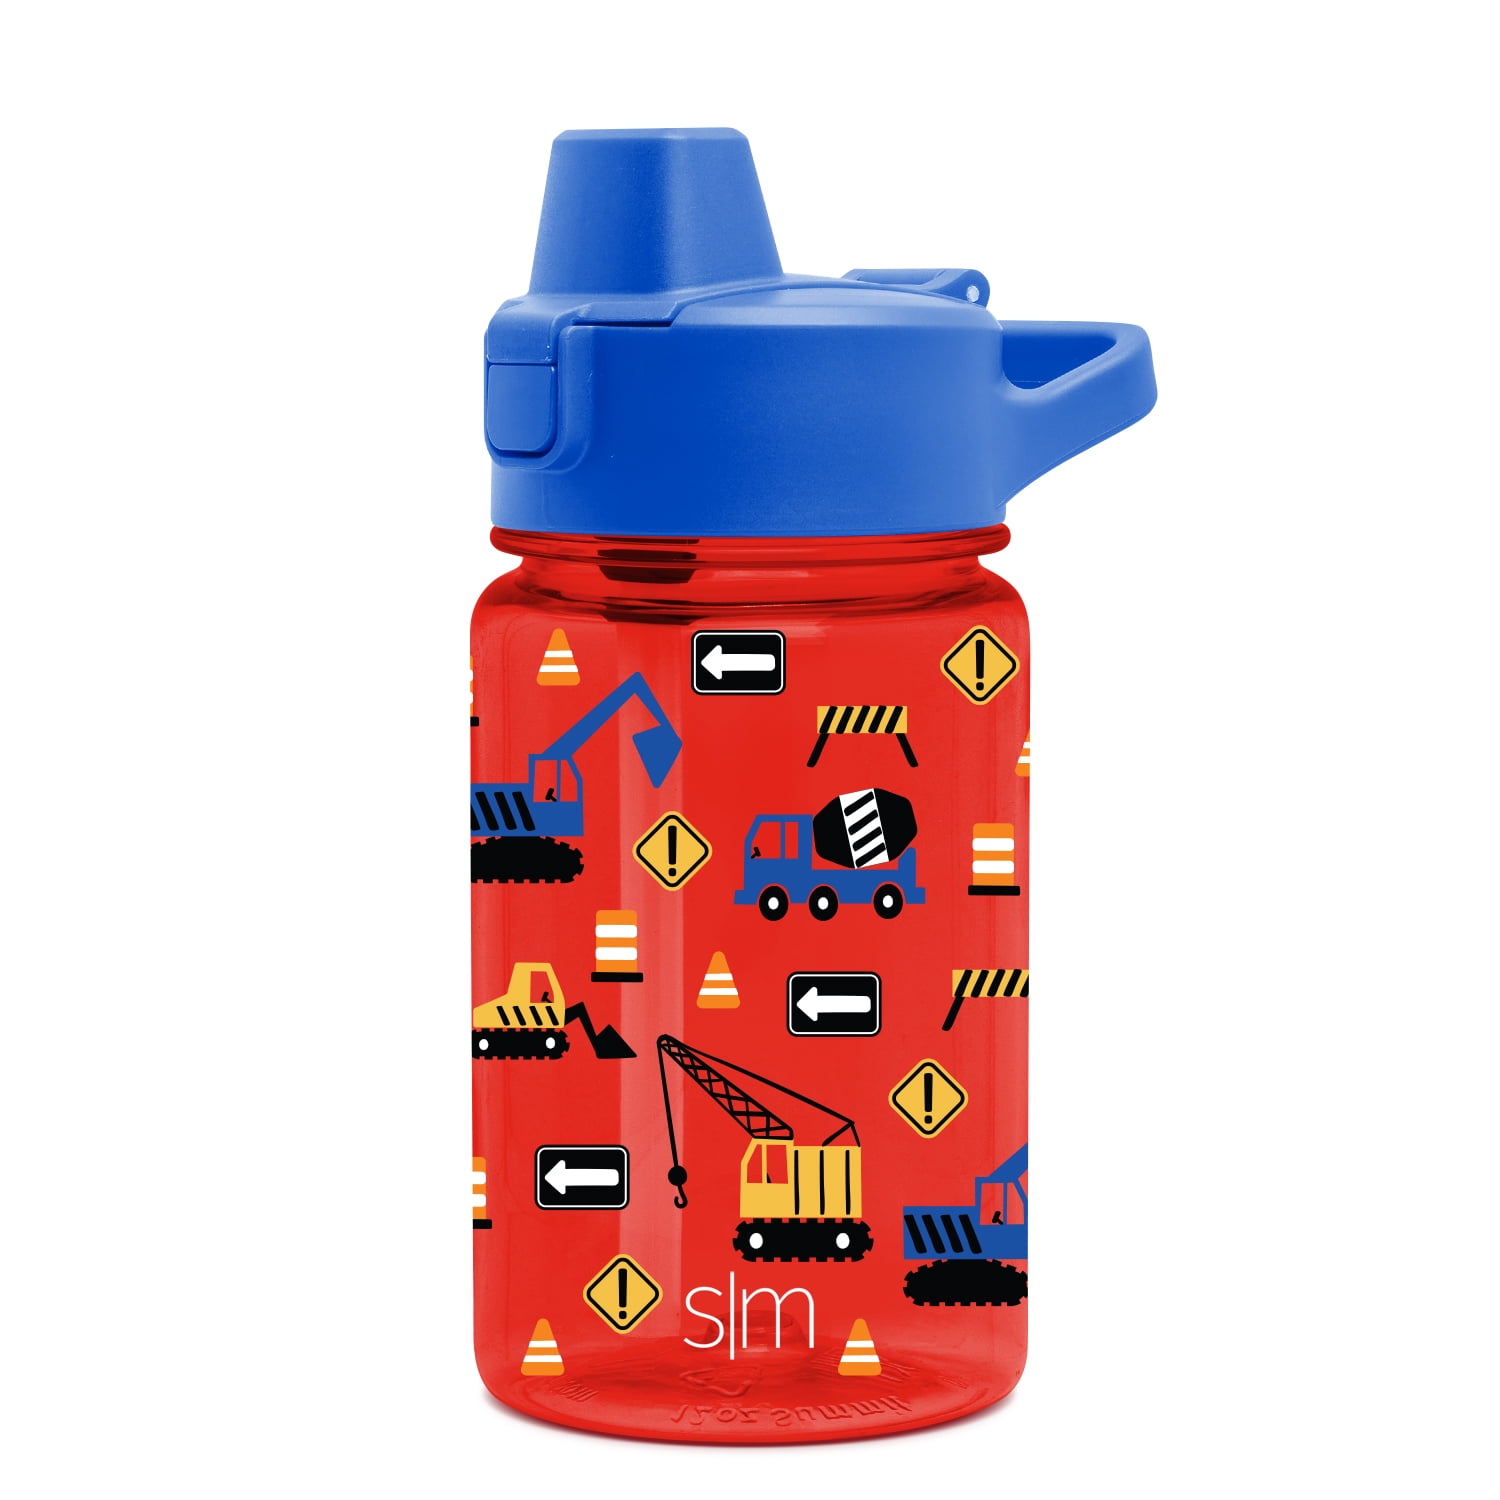 Kids Over the Rainbow 12 Oz. Bottle With Straw Cap